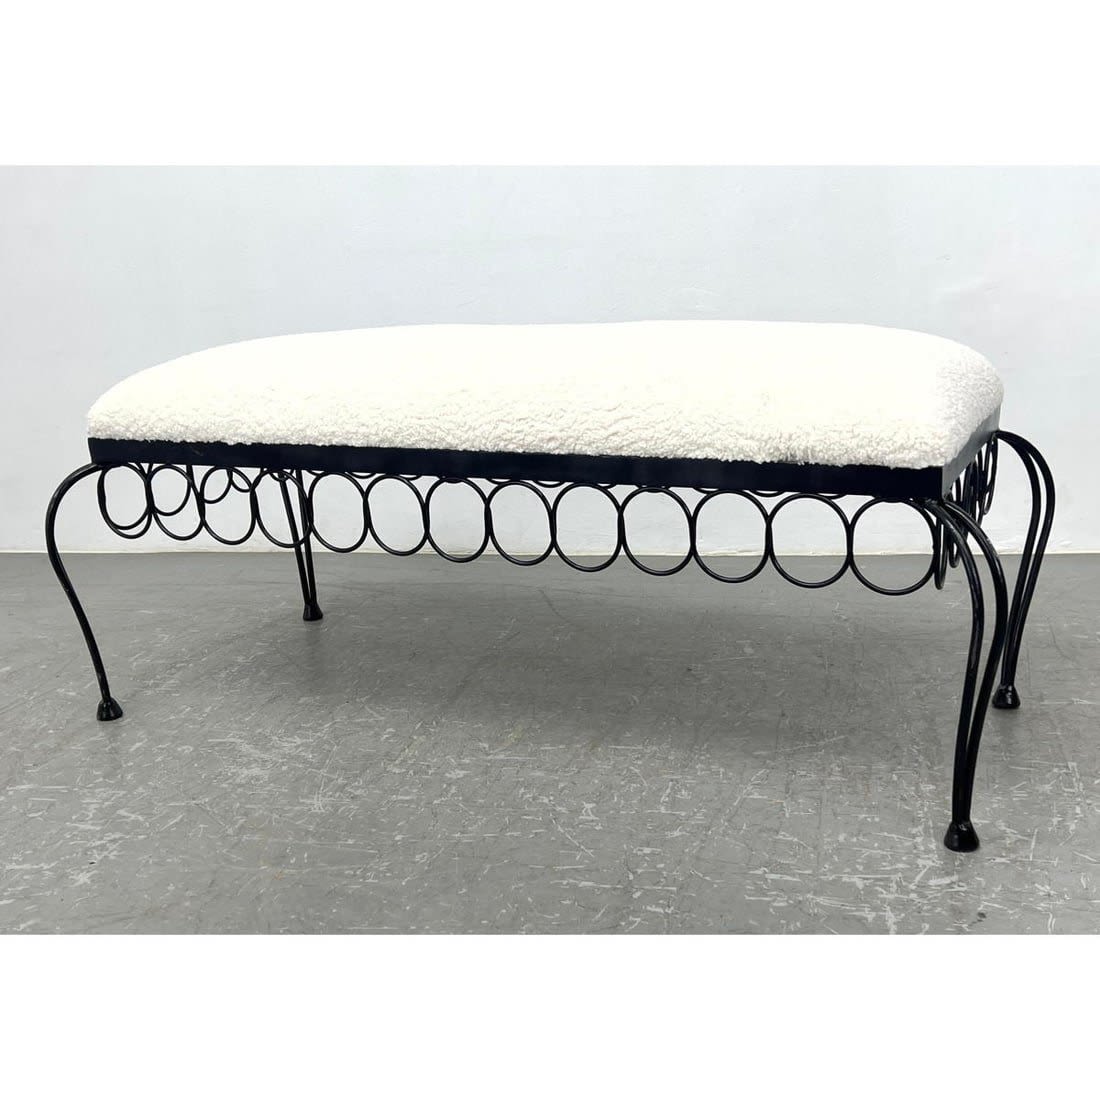 Contemporary iron bench with concentric